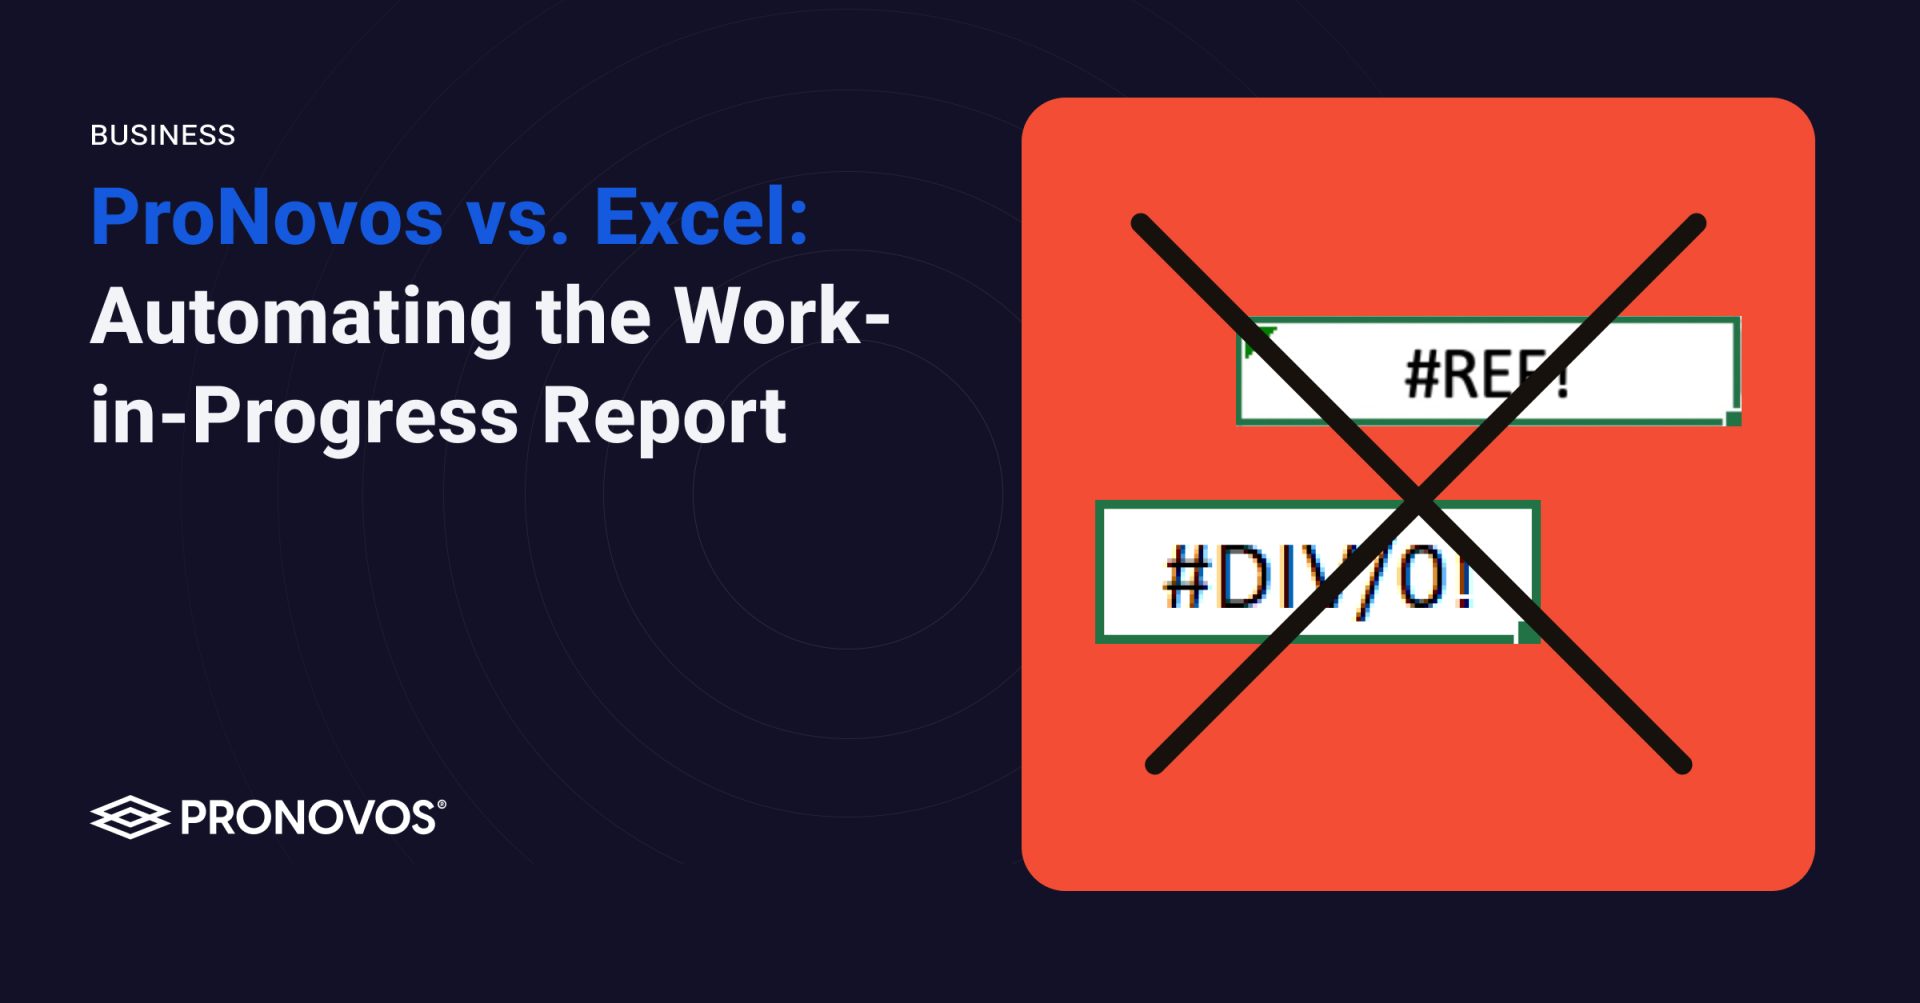 ProNovos vs. Excel: Automating the Work-in-Progress Report